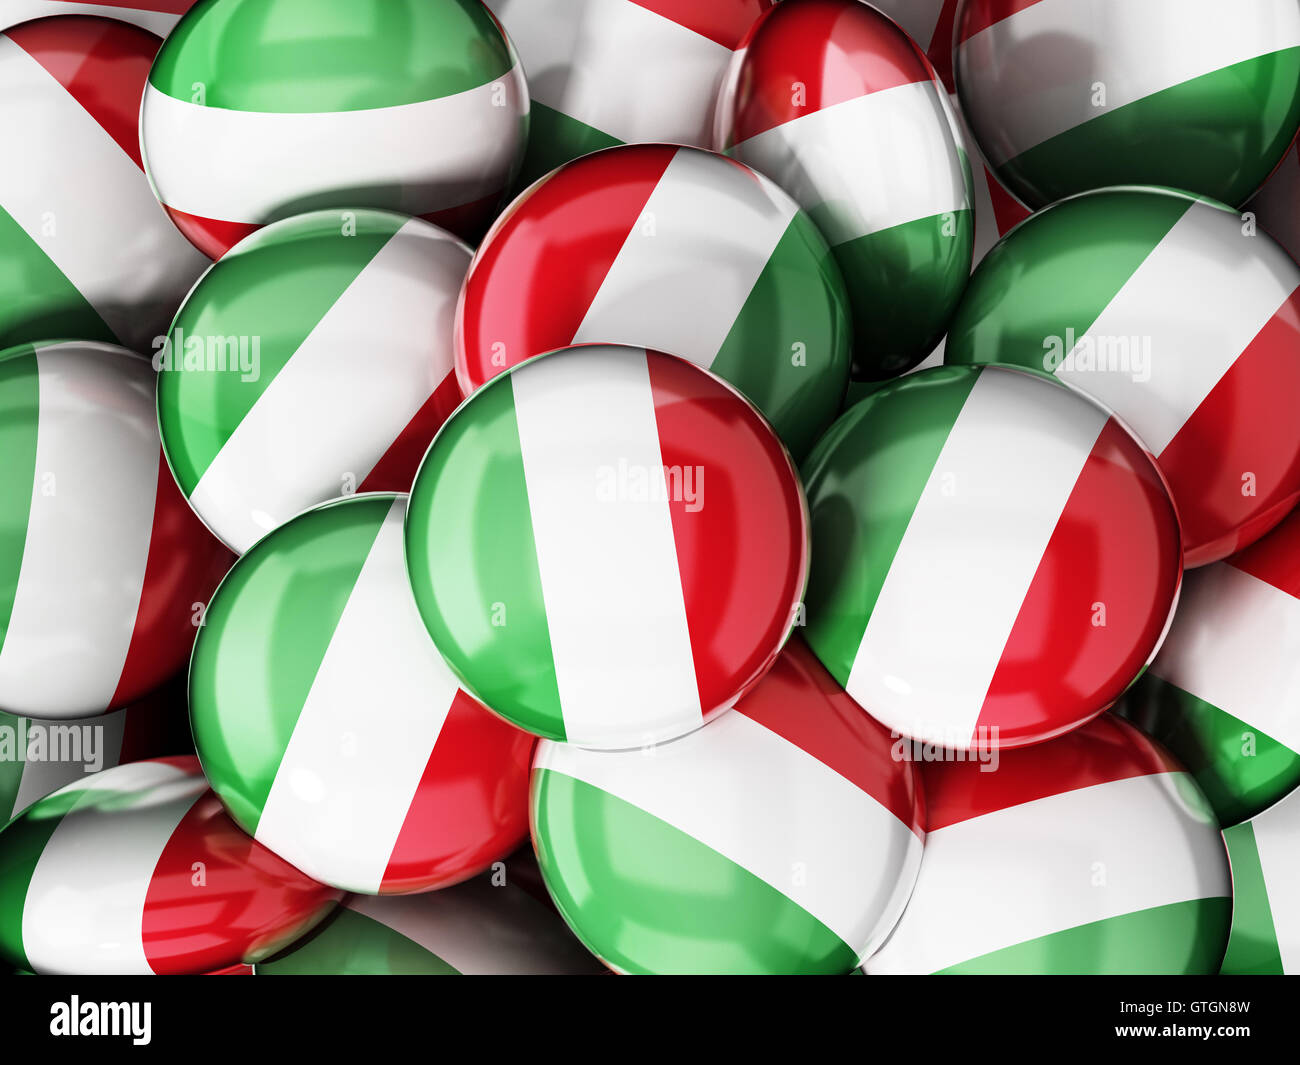 Stack of buttons with Italian flag. 3D illustration. Stock Photo